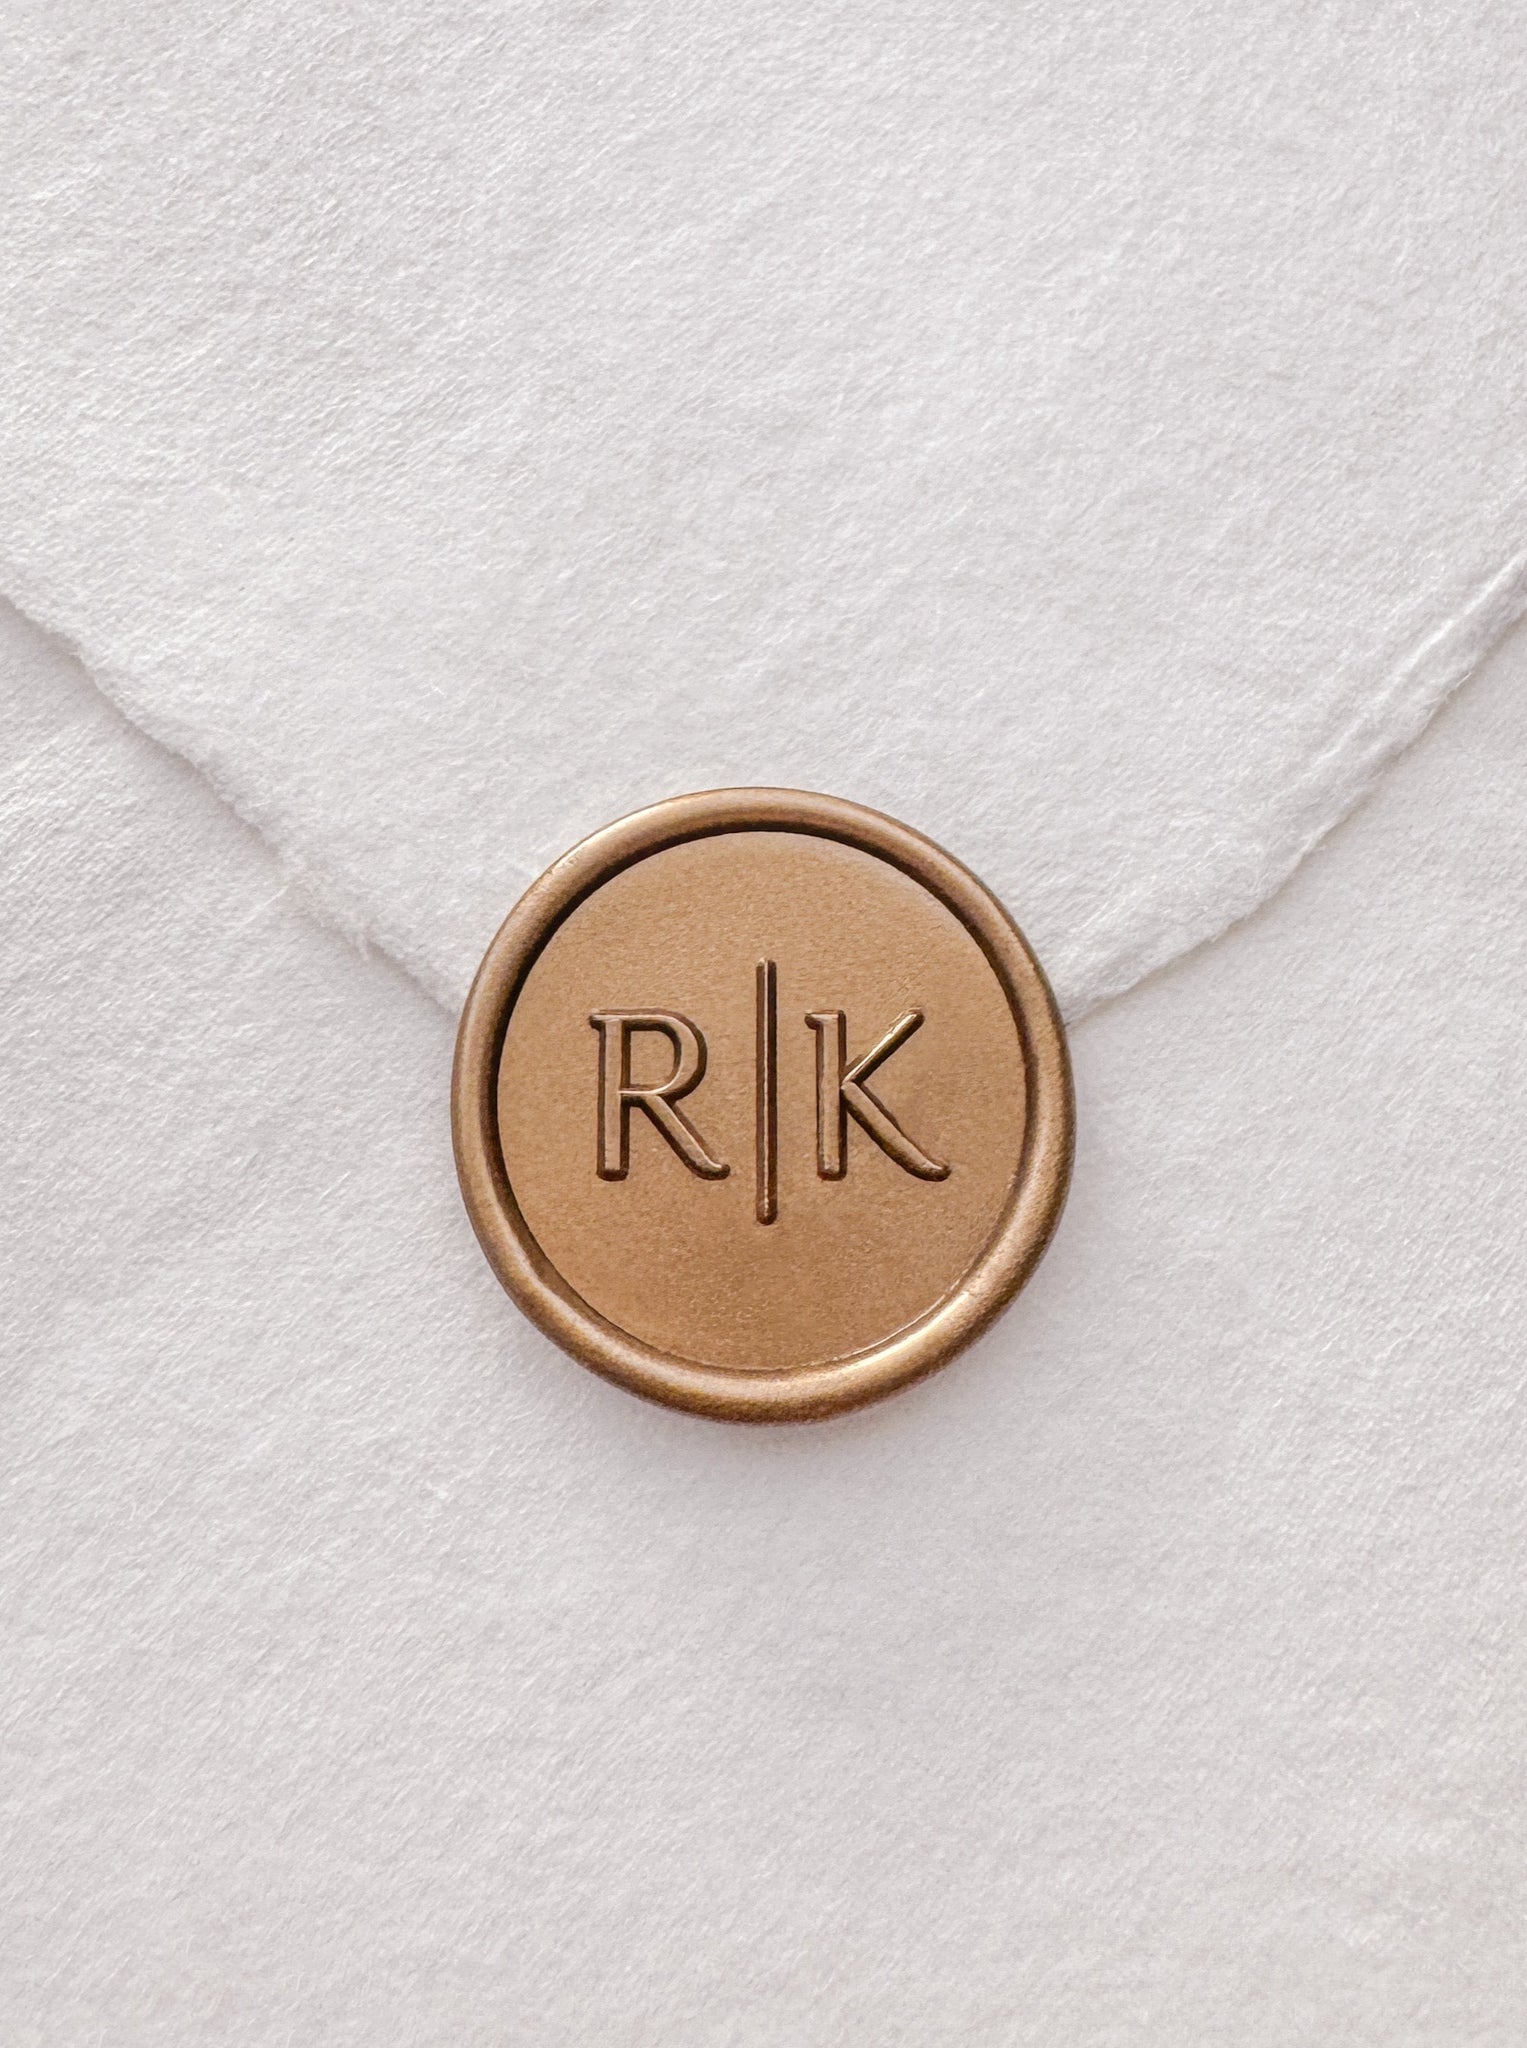 Typeface monogram gold wax seal on a white handmade paper envelope